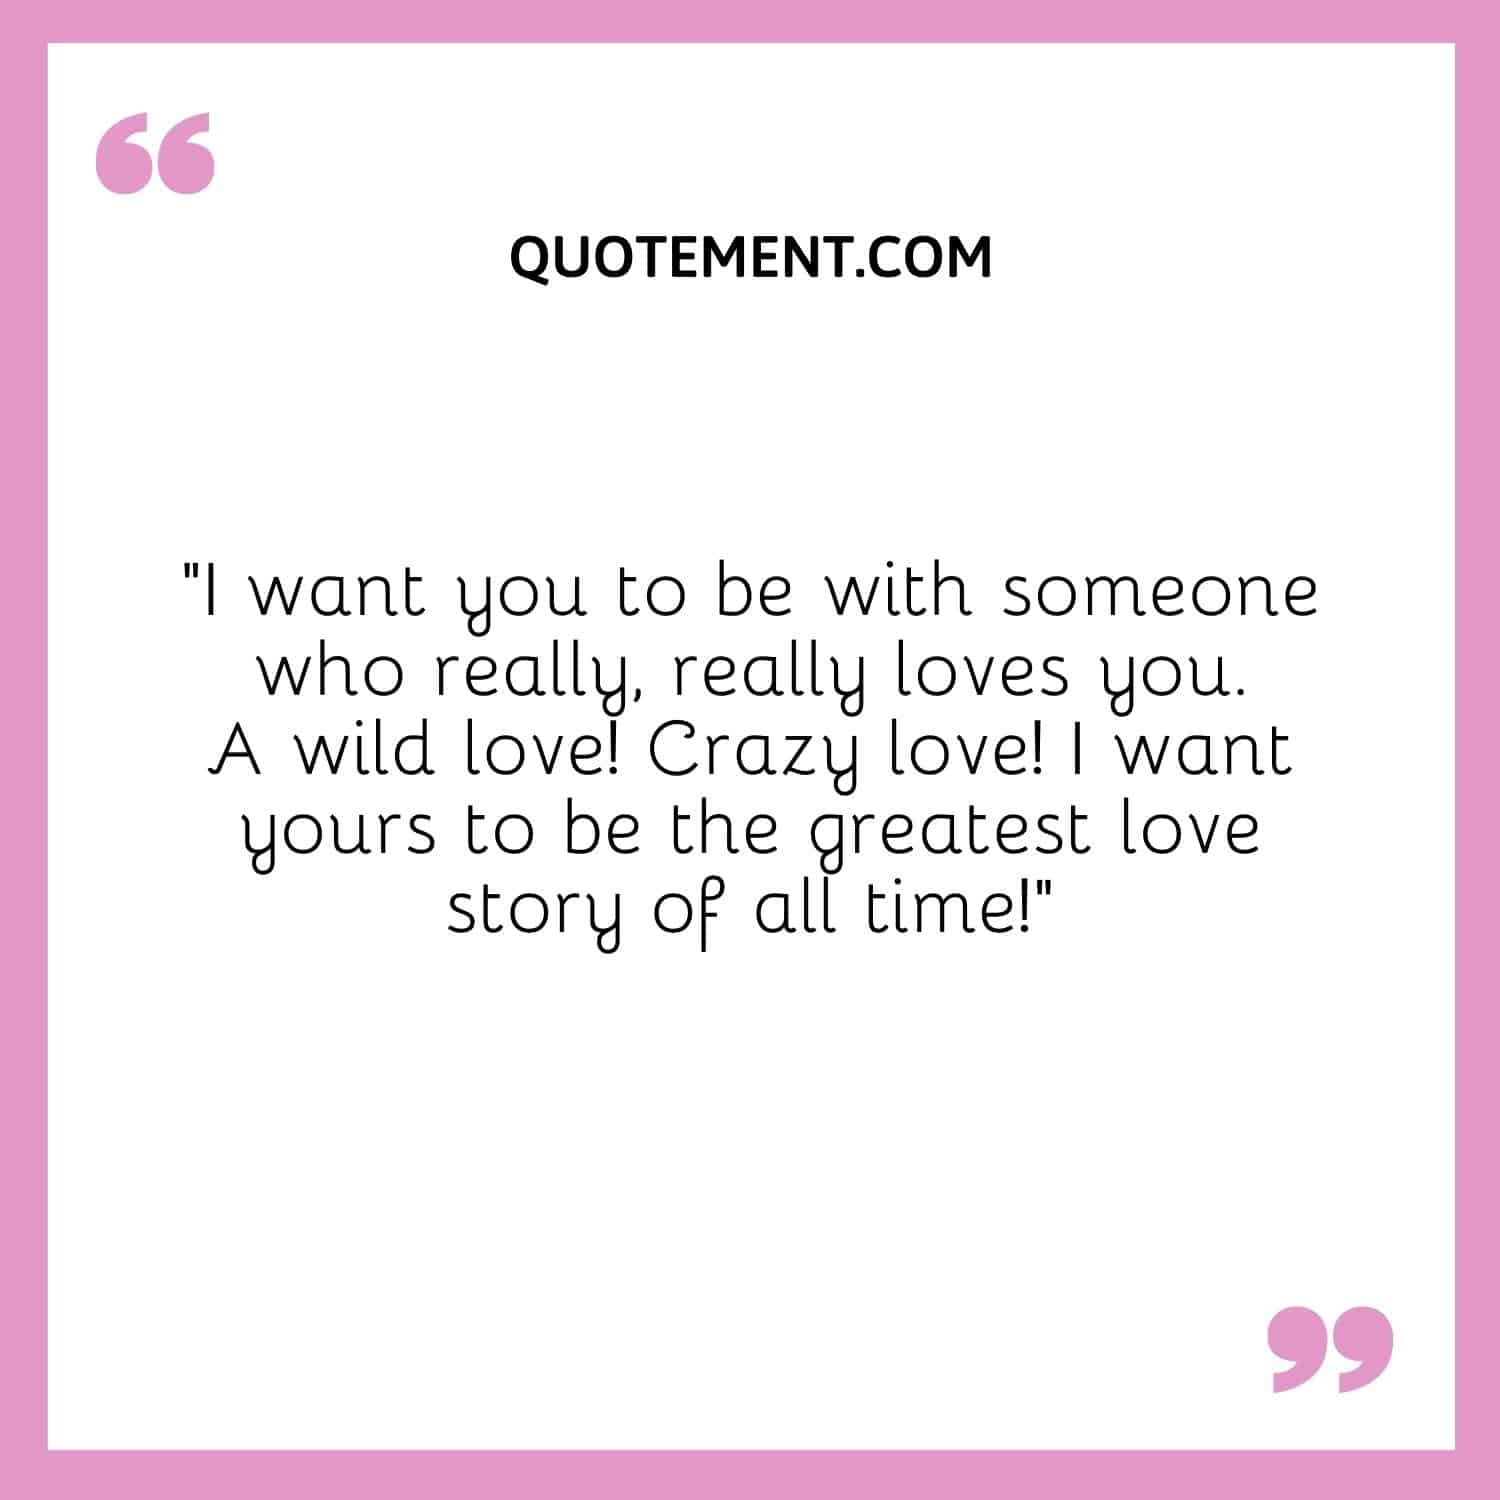 I want yours to be the greatest love story of all time